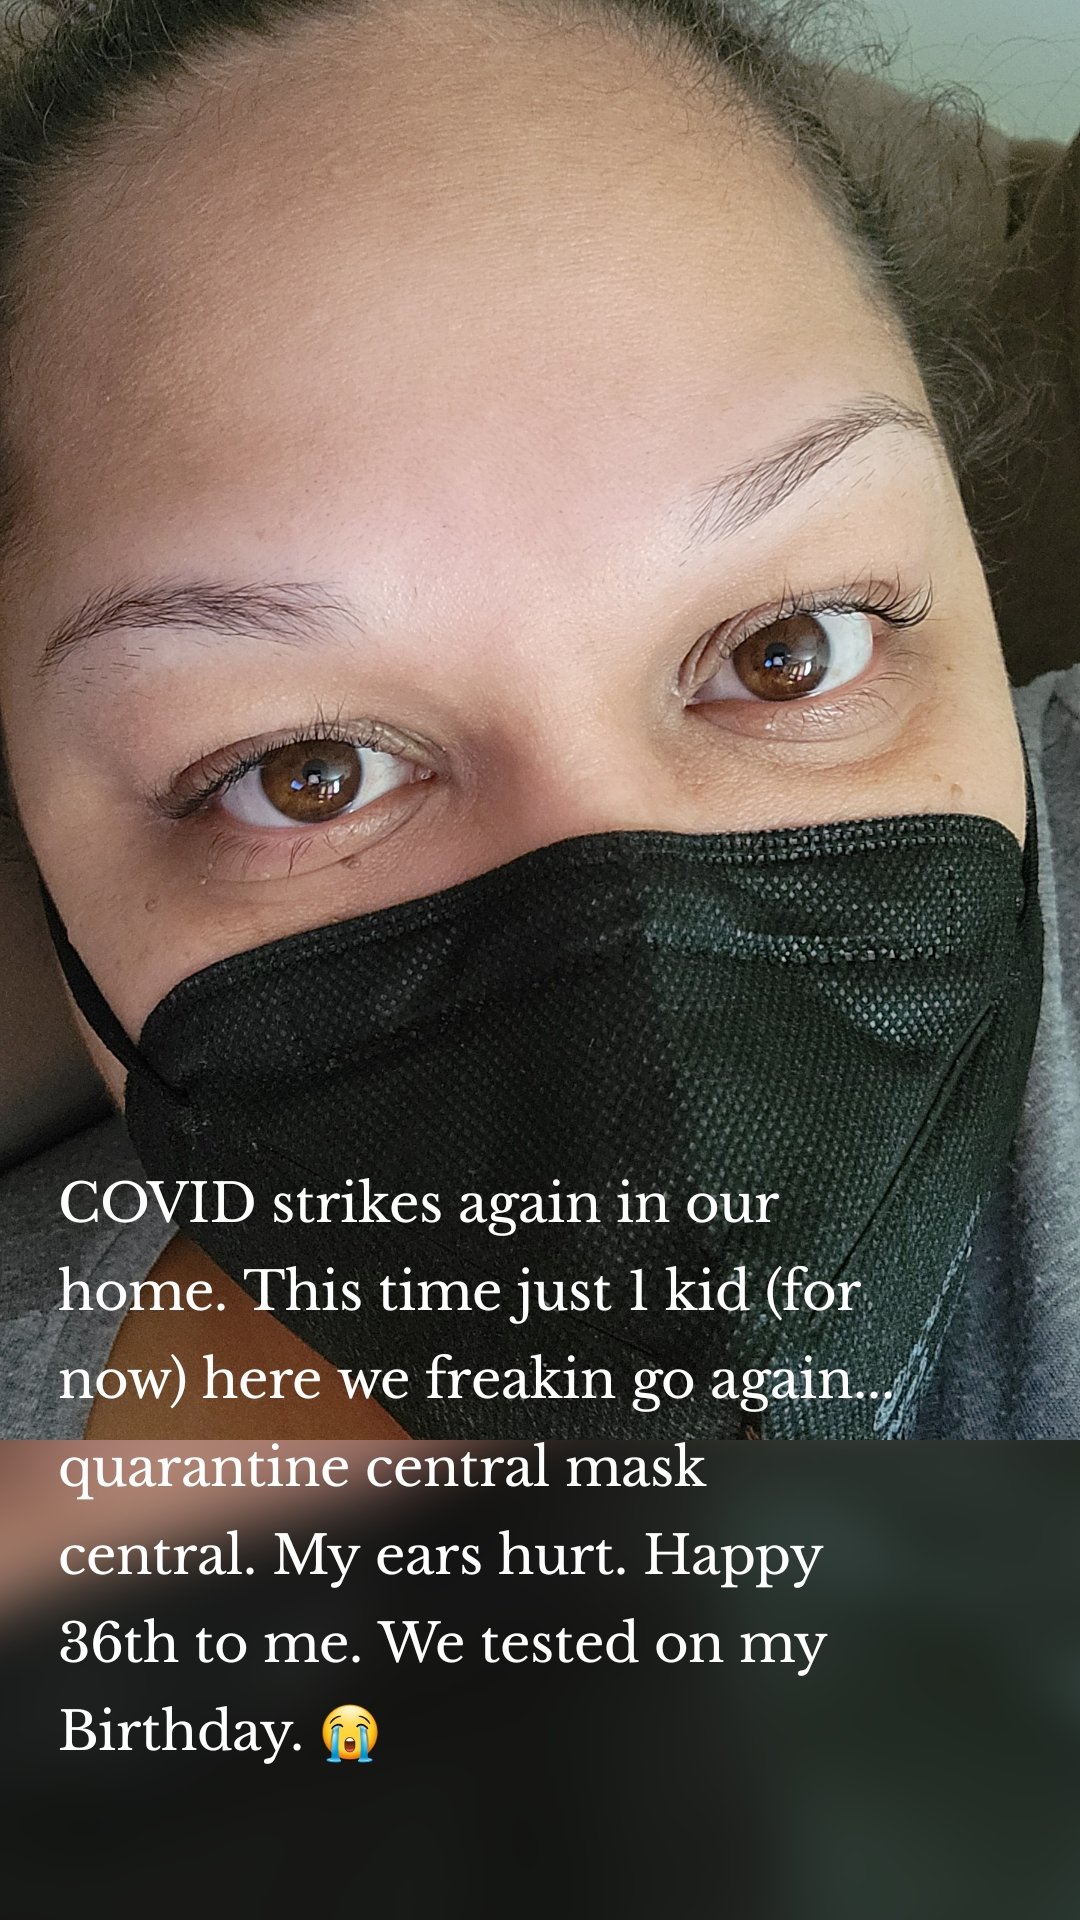 COVID strikes again in our home. This time just 1 kid (for now) here we freakin go again... quarantine central mask central. My ears hurt. Happy 36th to me. We tested on my Birthday. 😭